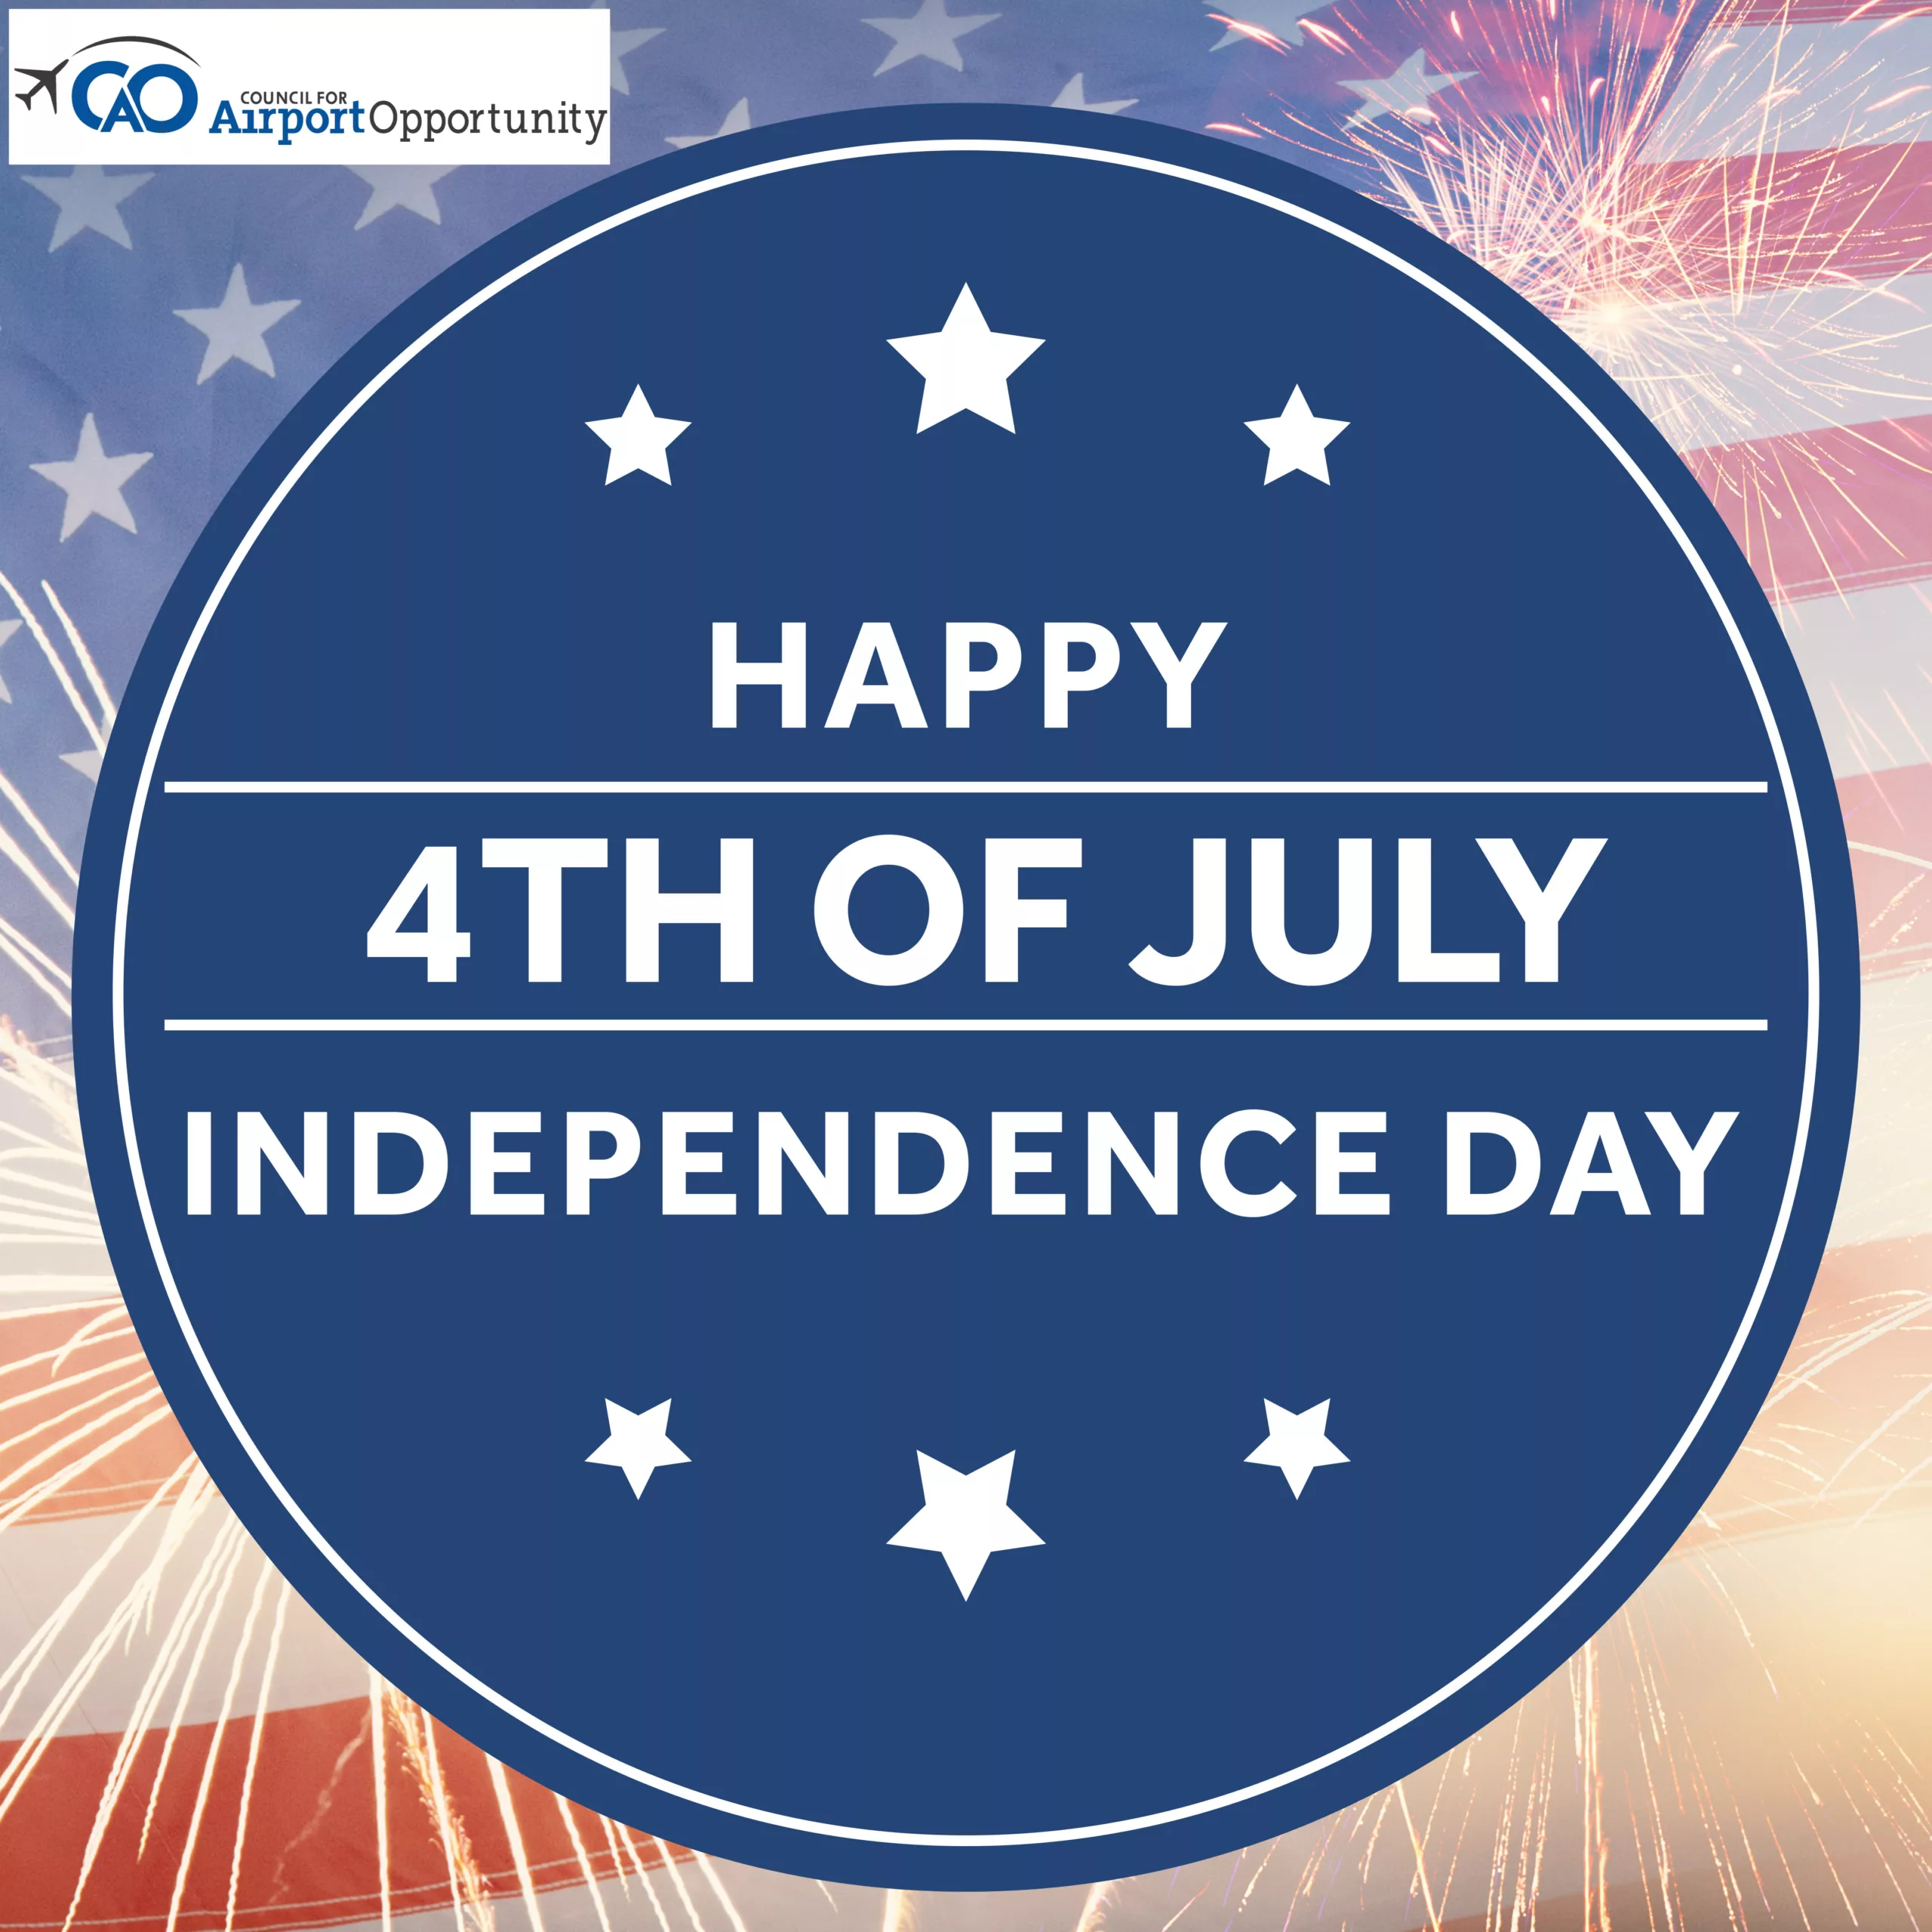 All CAO offices will be closed on ﻿Tuesday, July 4, 2023 in observance